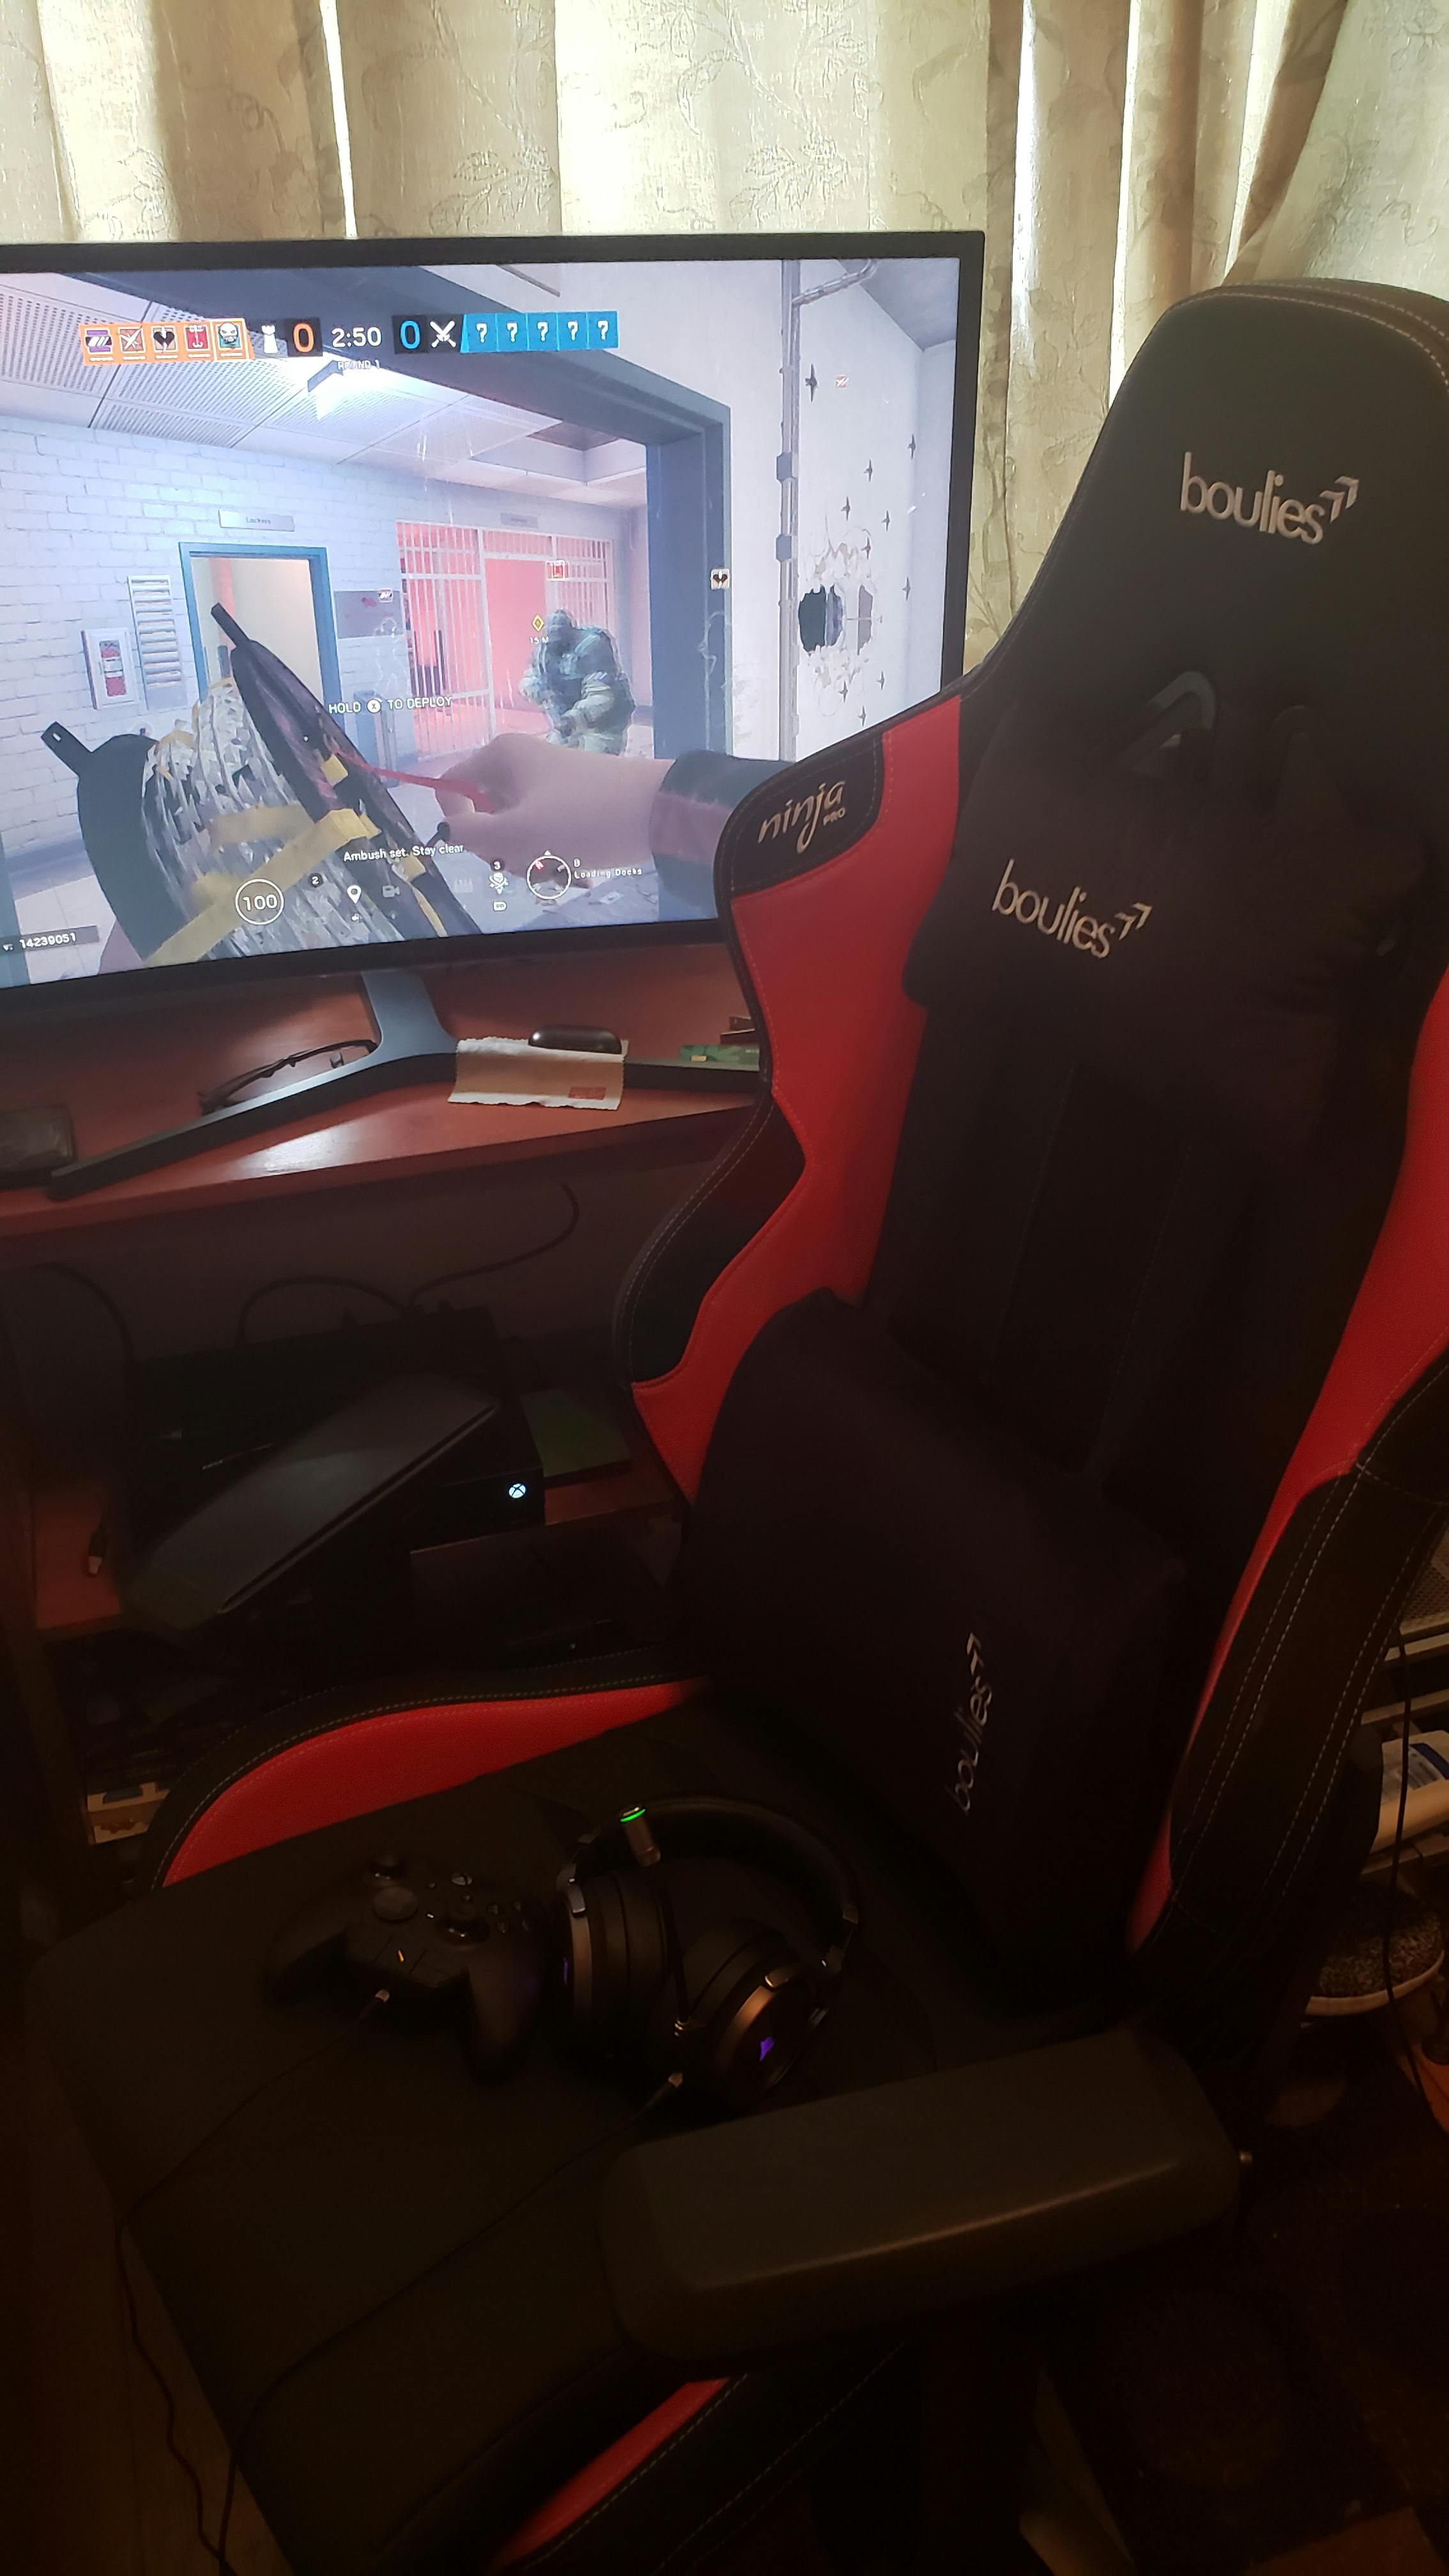 happy game chair review